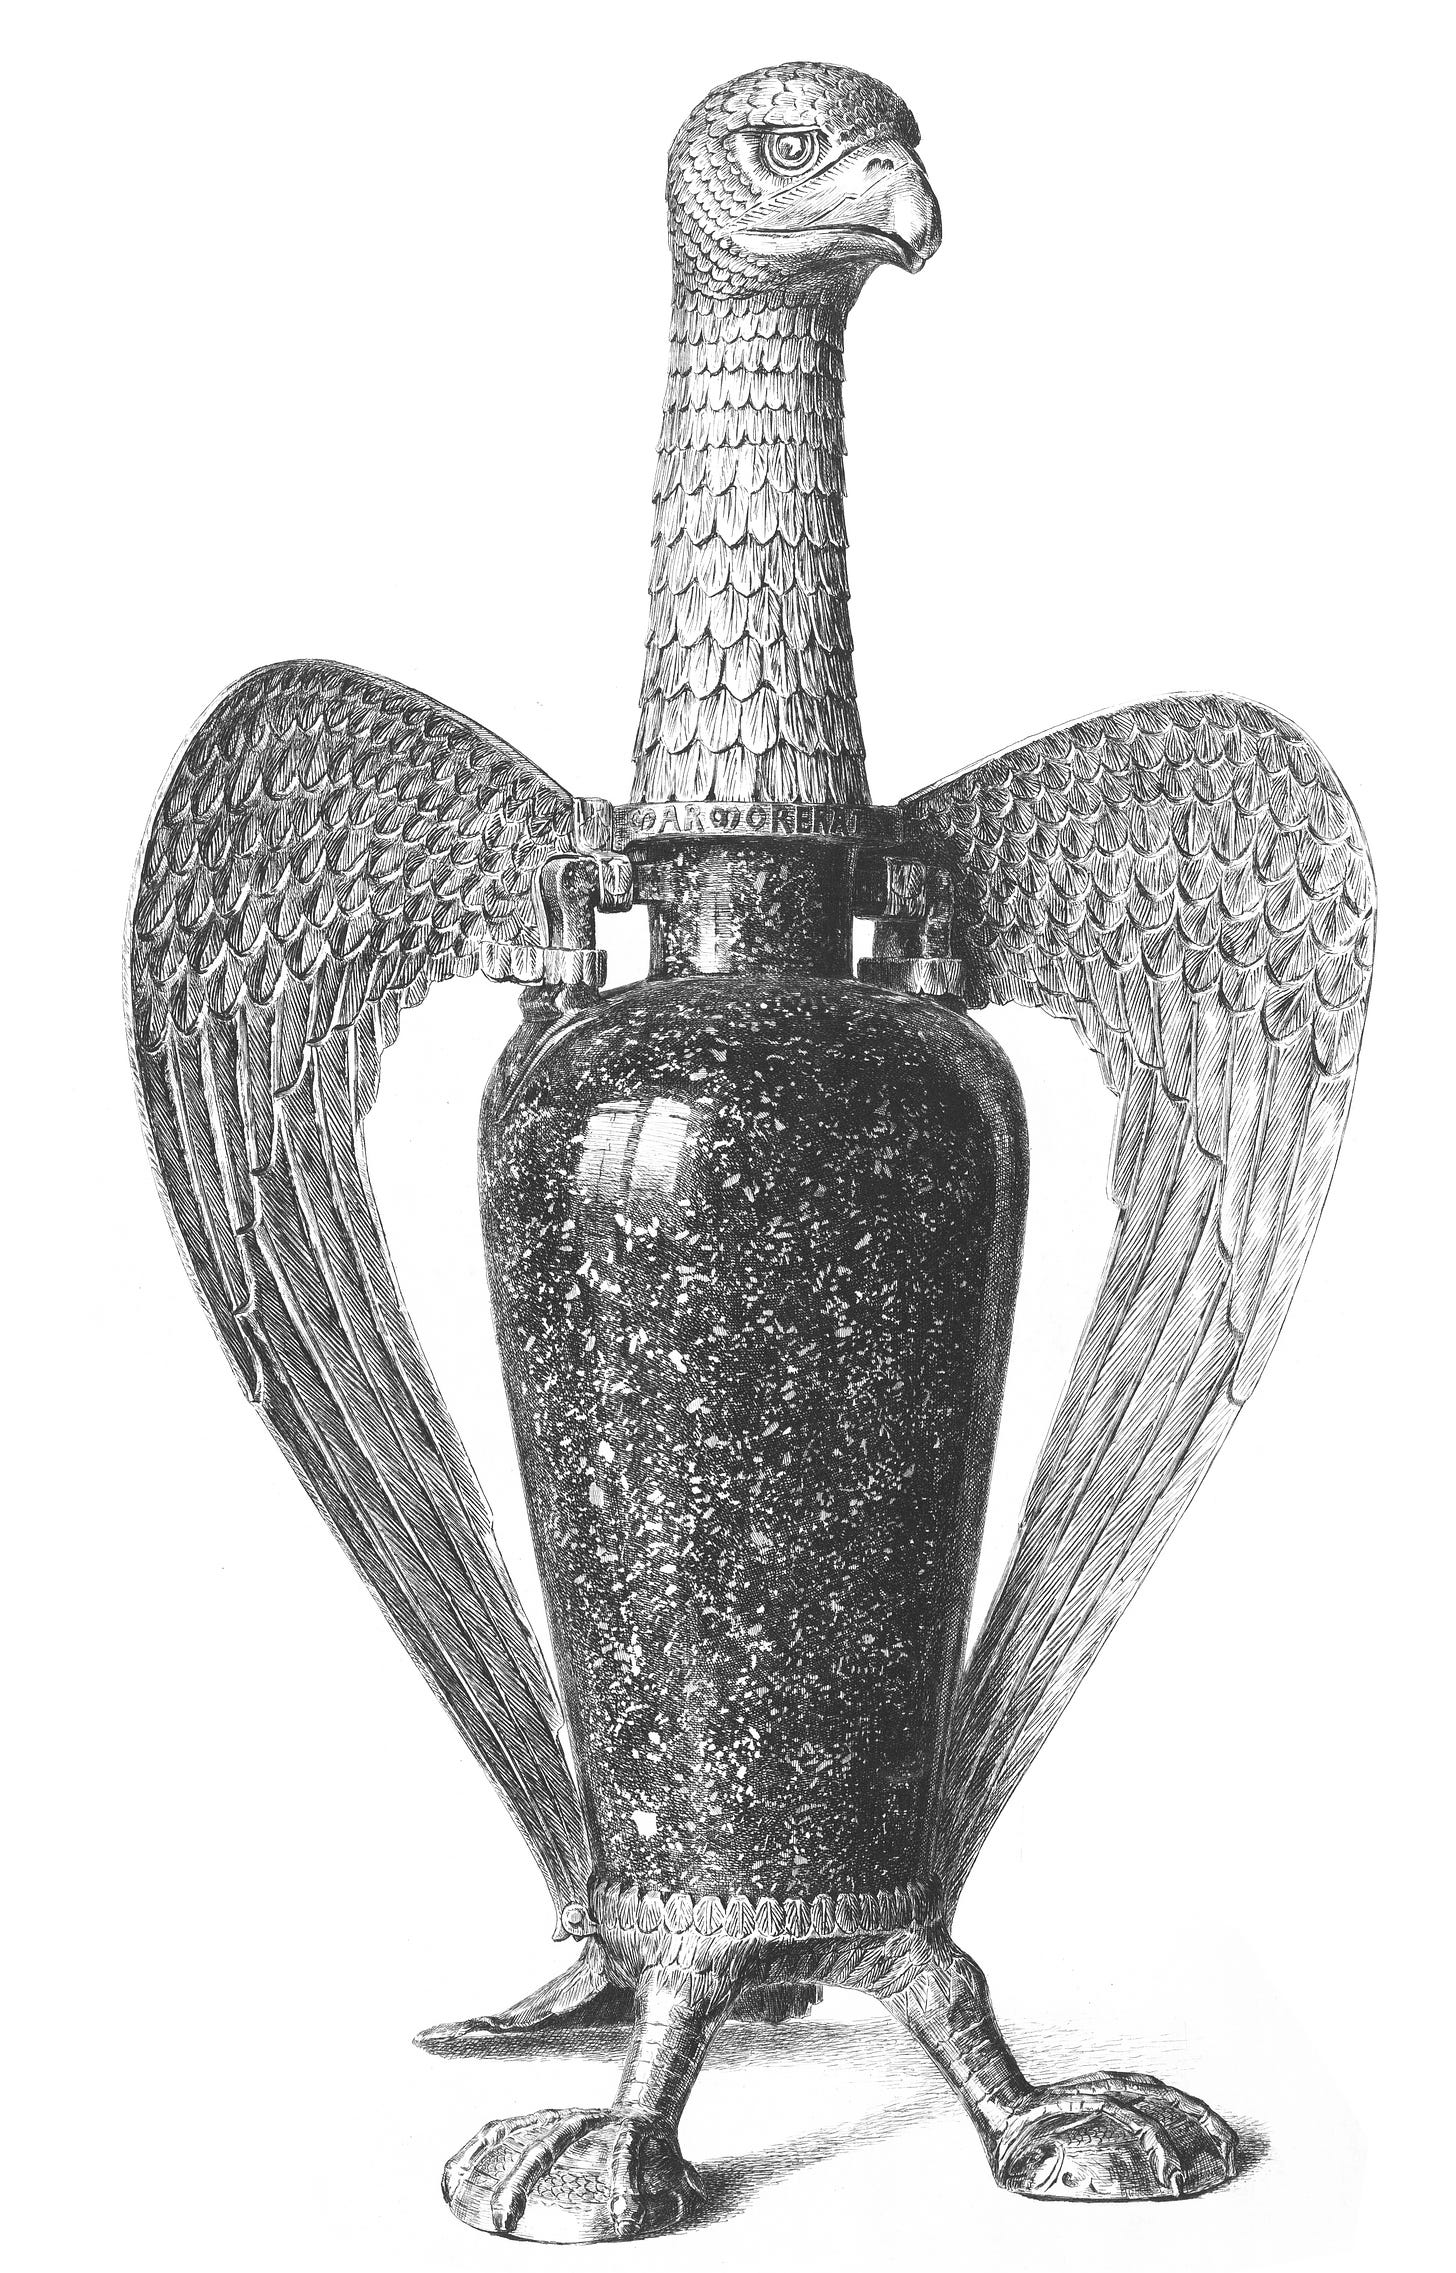 Black and white illustration of a porphyry vase, adorned with eagle head and wings.